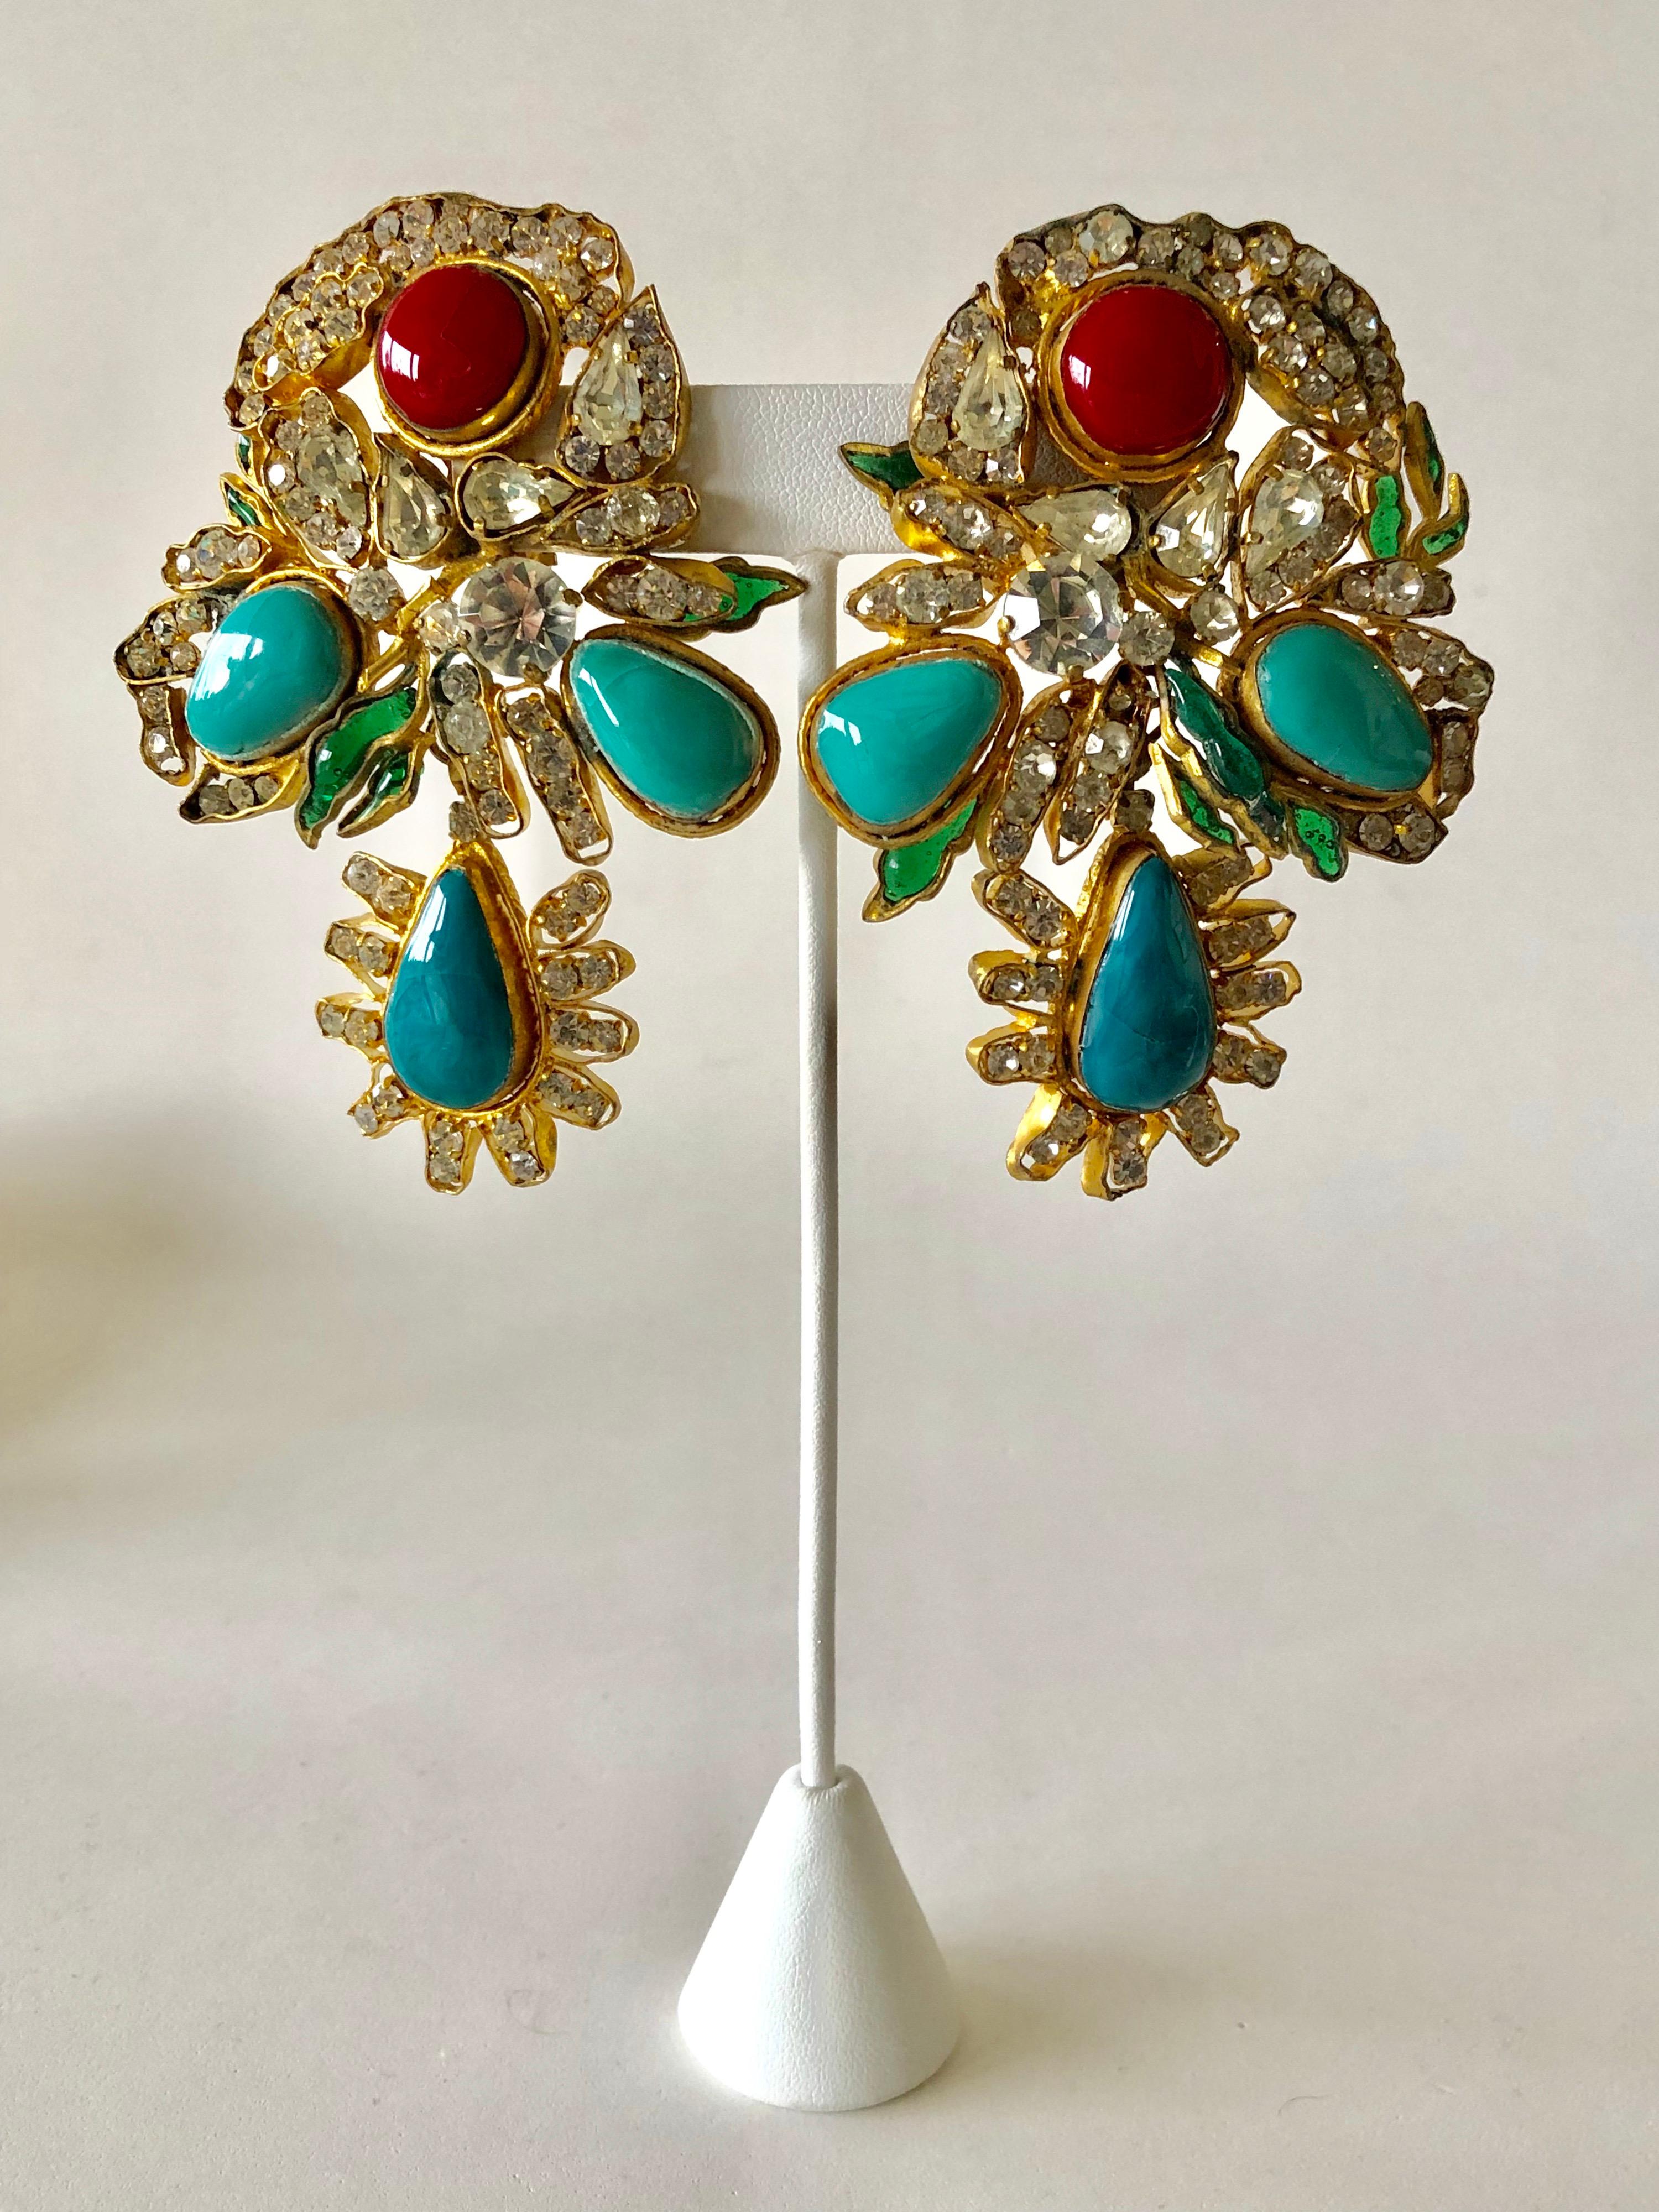 Vintage Yves Saint Laurent Haute Couture Mughal Statement Earrings  1